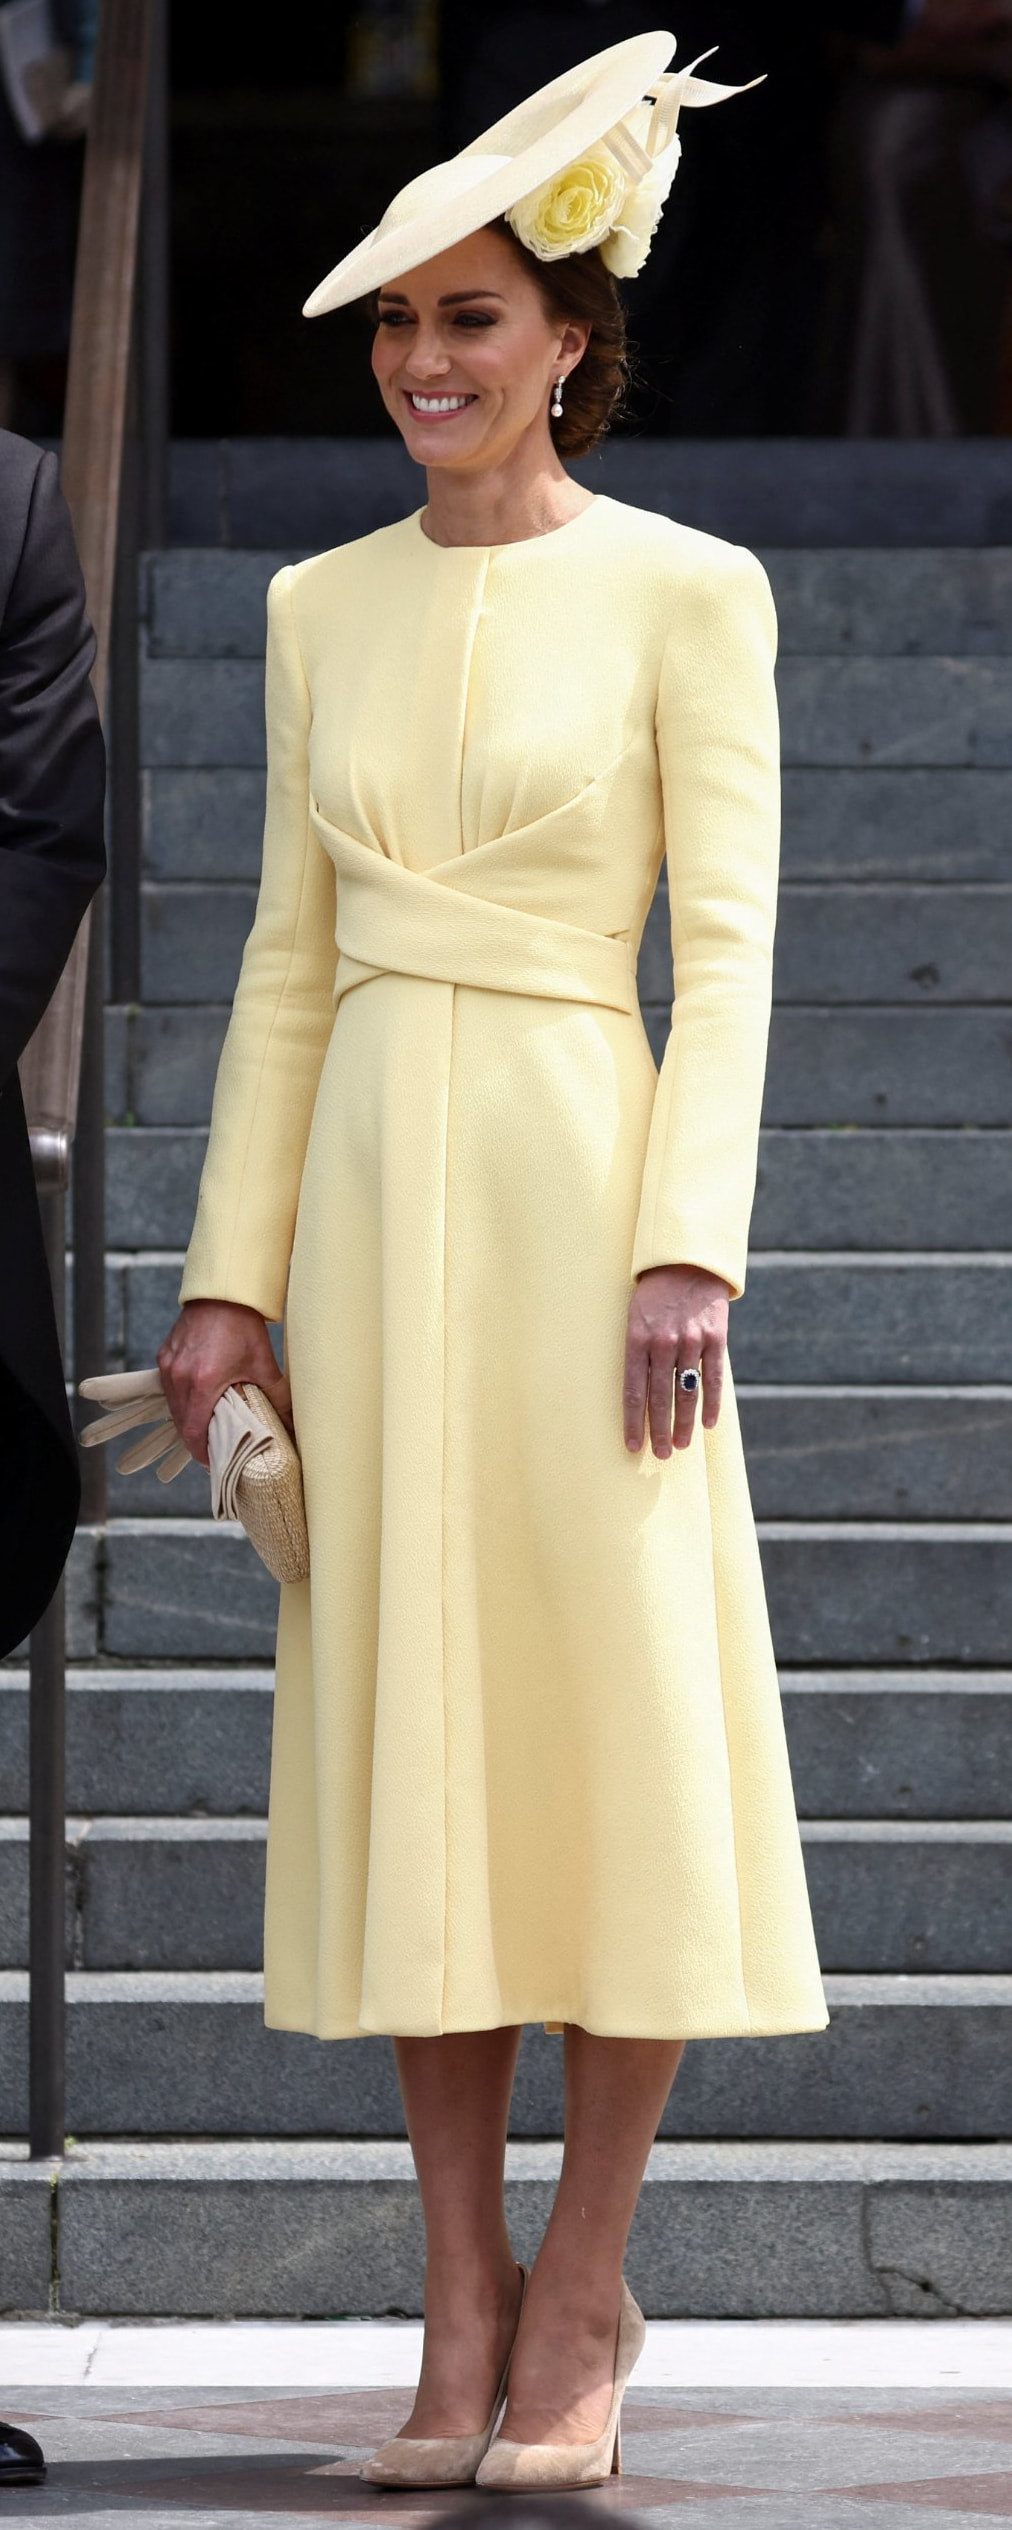 Philip Treacy Saucer Hat in Soft Yellow as seen on Kate Middleton, The Duchess of Cambridge.